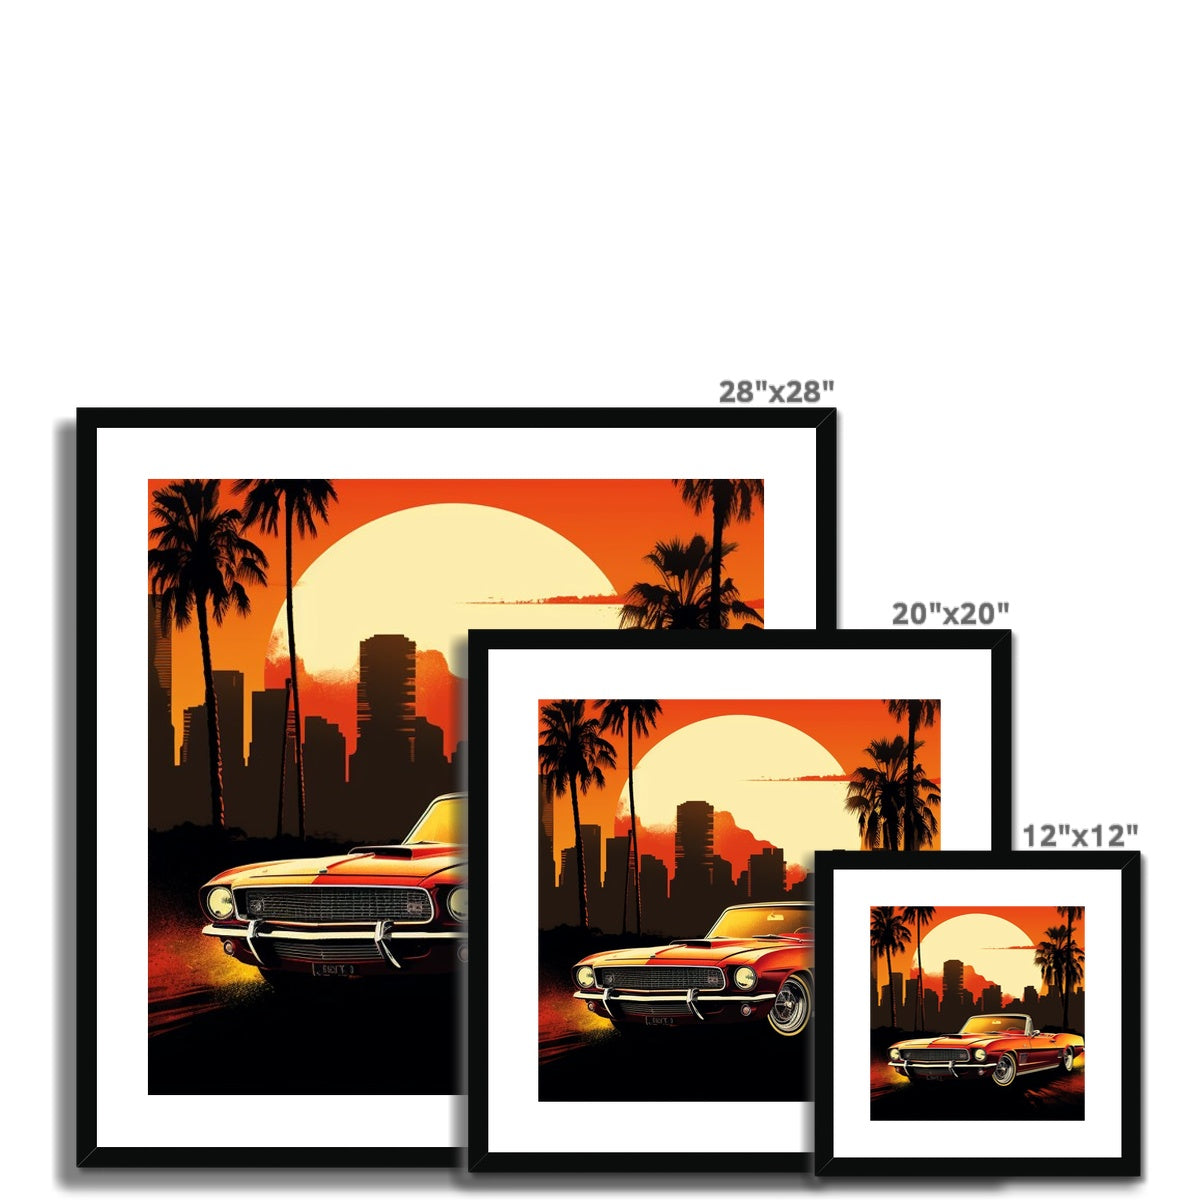 Classic Mustang, Los Angeles Skyline Backdrop Framed & Mounted Print